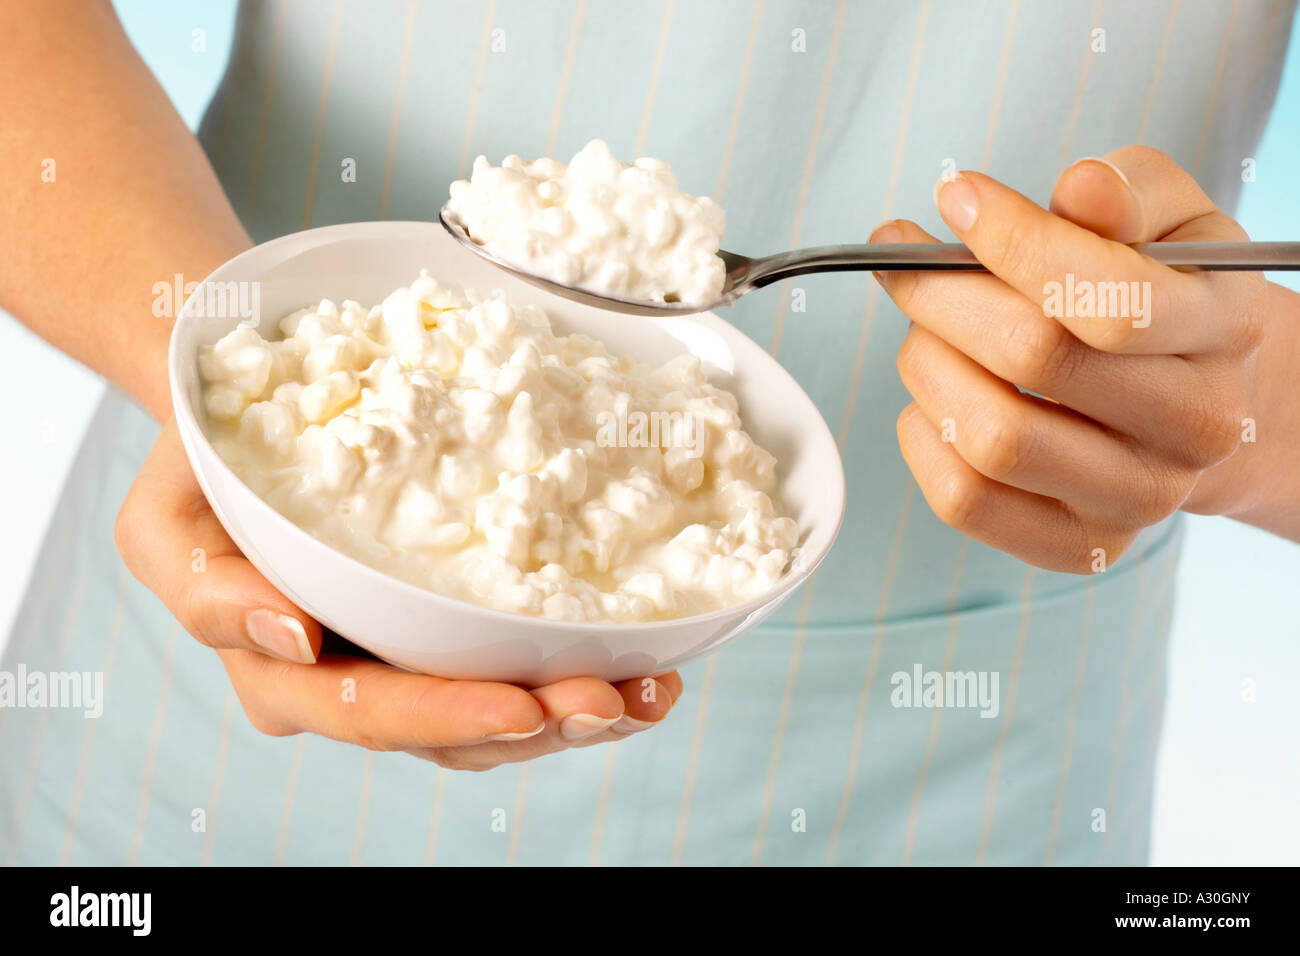 Woman Eating Cottage Cheese Stock Photo 10630406 Alamy